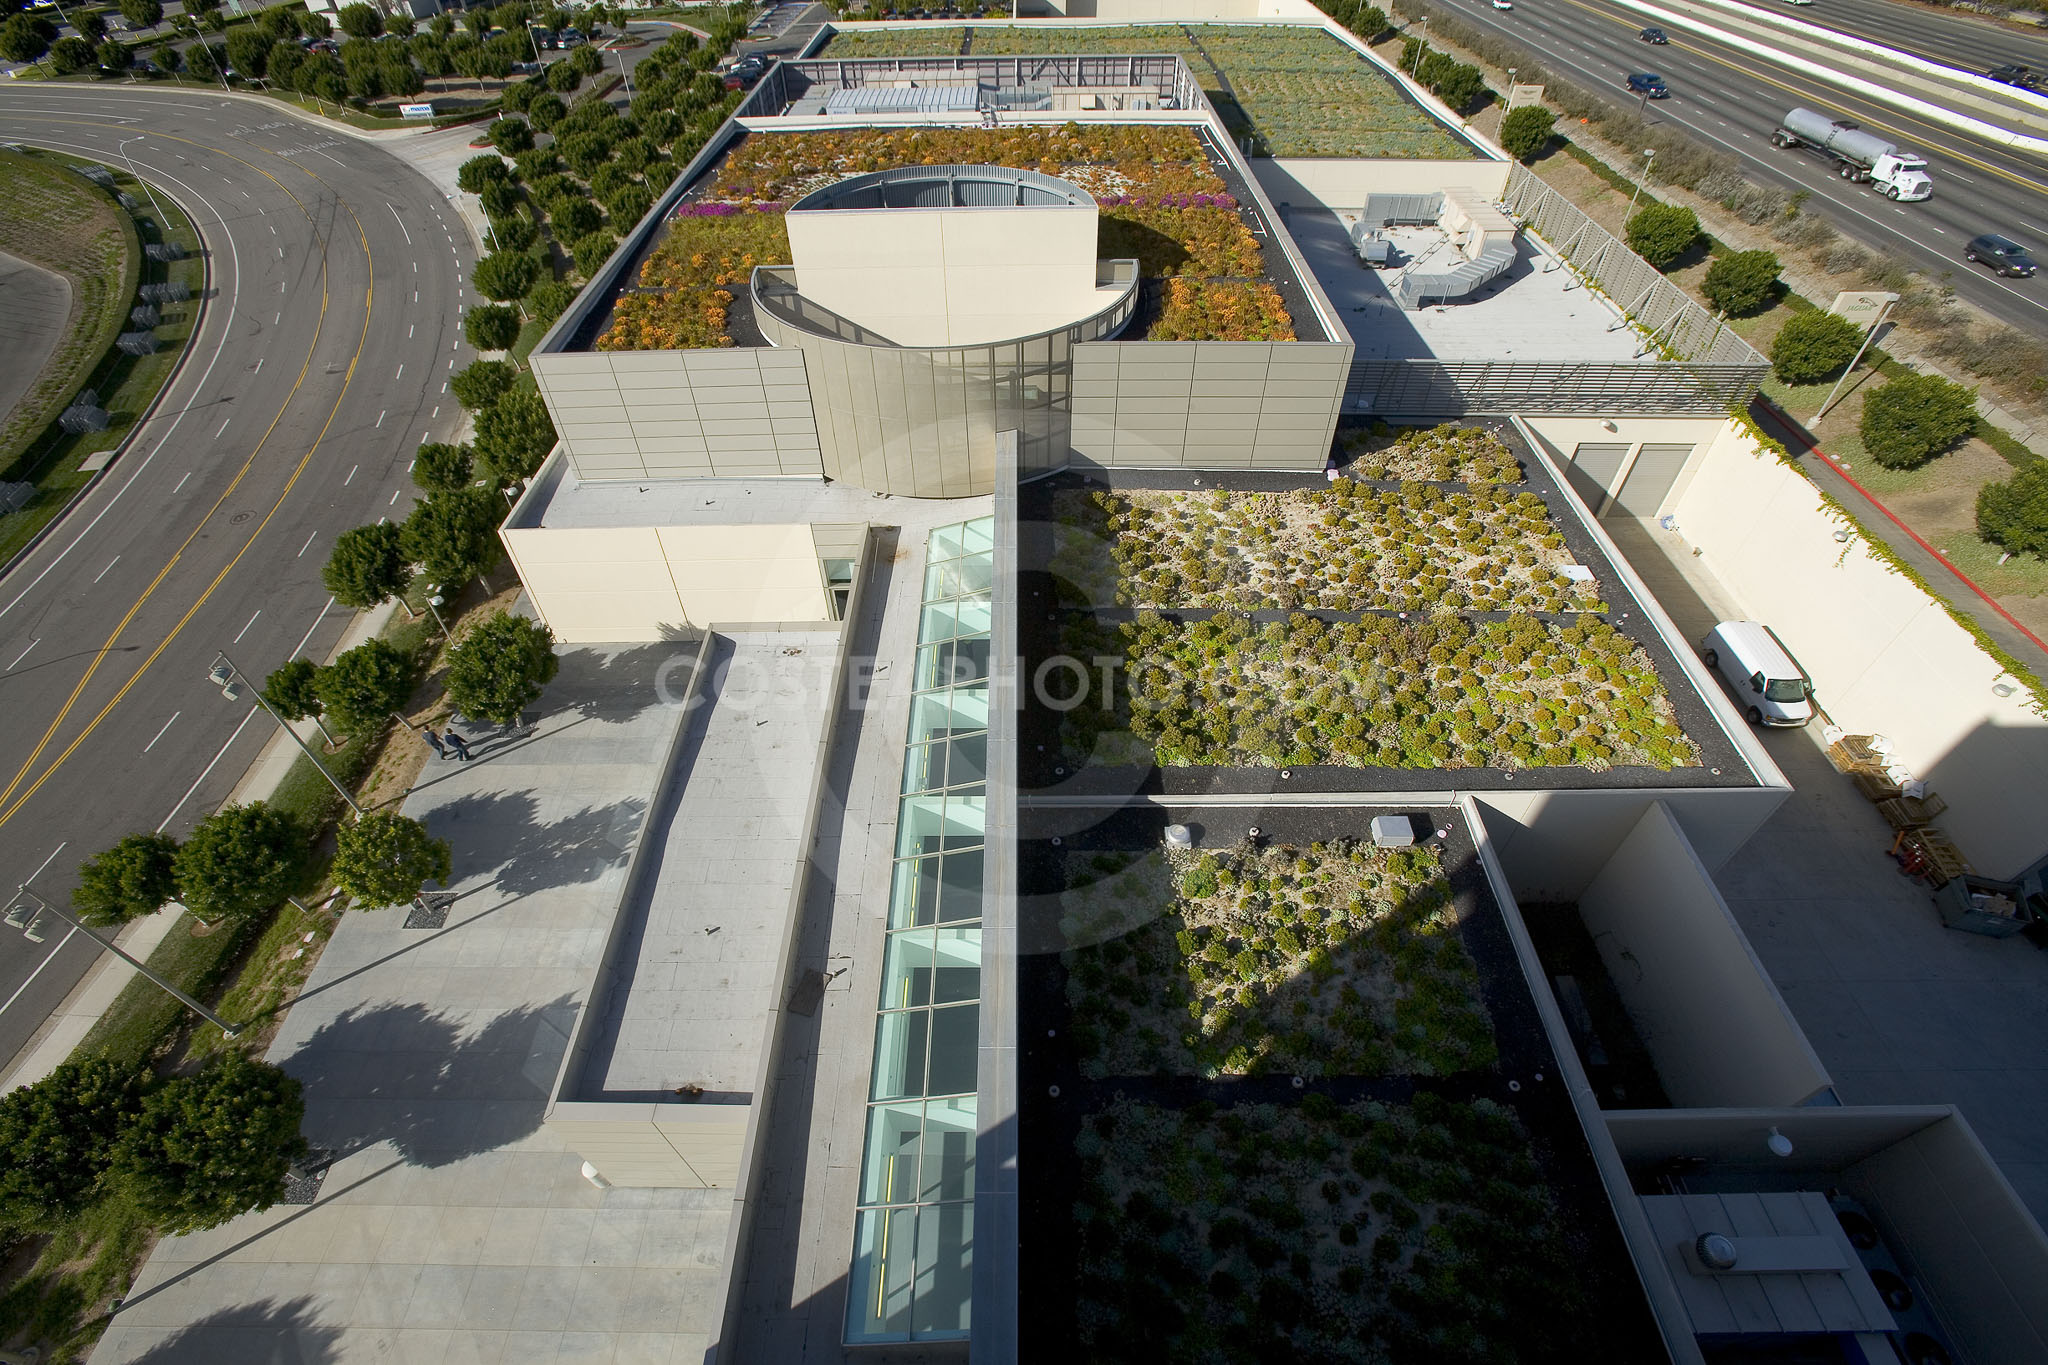 PAG Green Roof 020